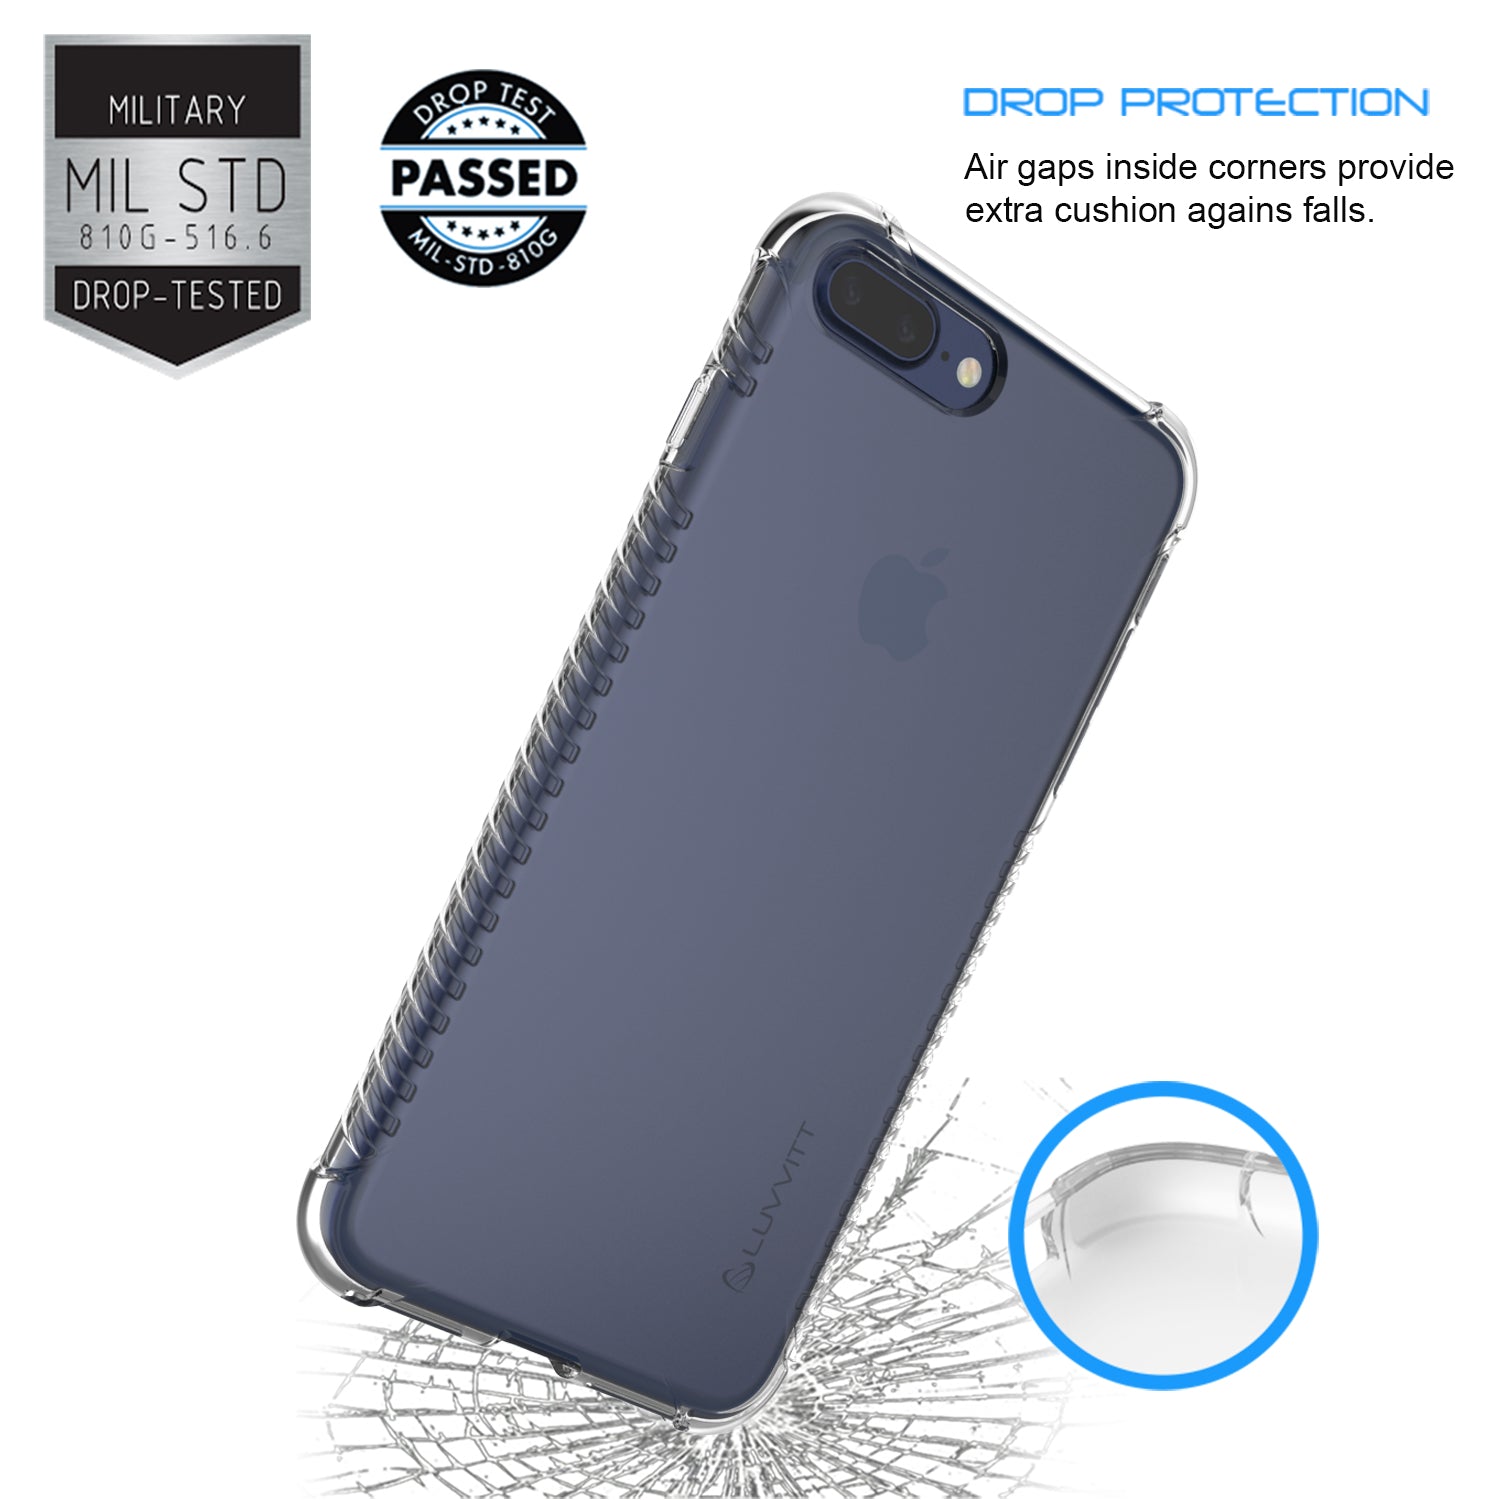 LUVVITT CLEAR GRIP iPhone 7 PRO Case Soft TPU Rubber Back Cover - Crystal Clear